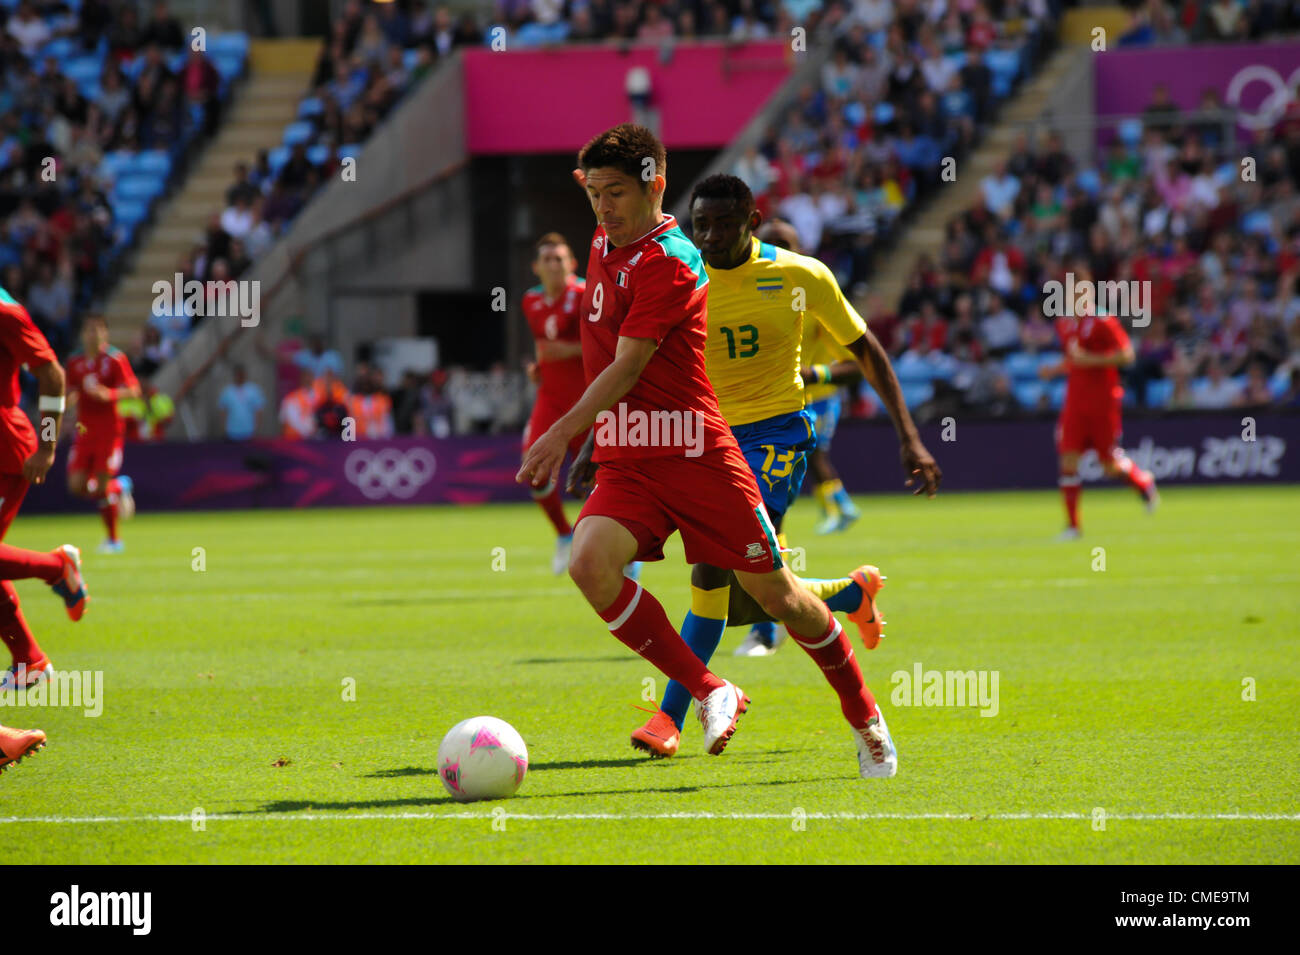 29.07.2012 Coventry, England. Oribe PERALTA (Mexico) and Mabikou BOUSSOUGHOU (Gabon) in action during the Olympic Football Men's Preliminary game between Mexico and Gabon from the City of Coventry Stadium Stock Photo